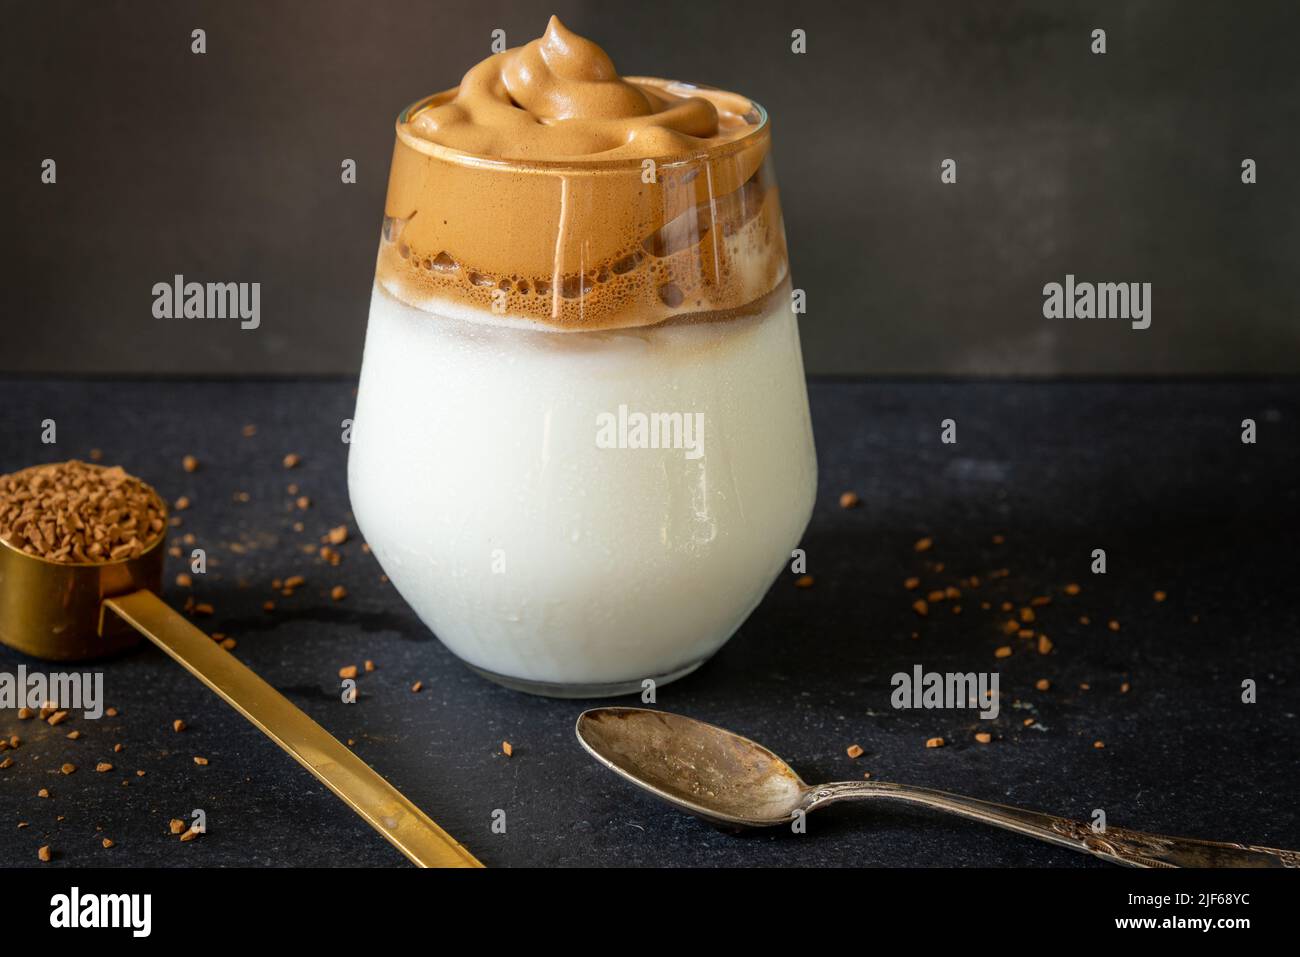 Dalgona coffee. Korean style coffee ice drink on dark background. Instant coffee whipped with sugar and water for tasty breakfast. Very fashionable co Stock Photo